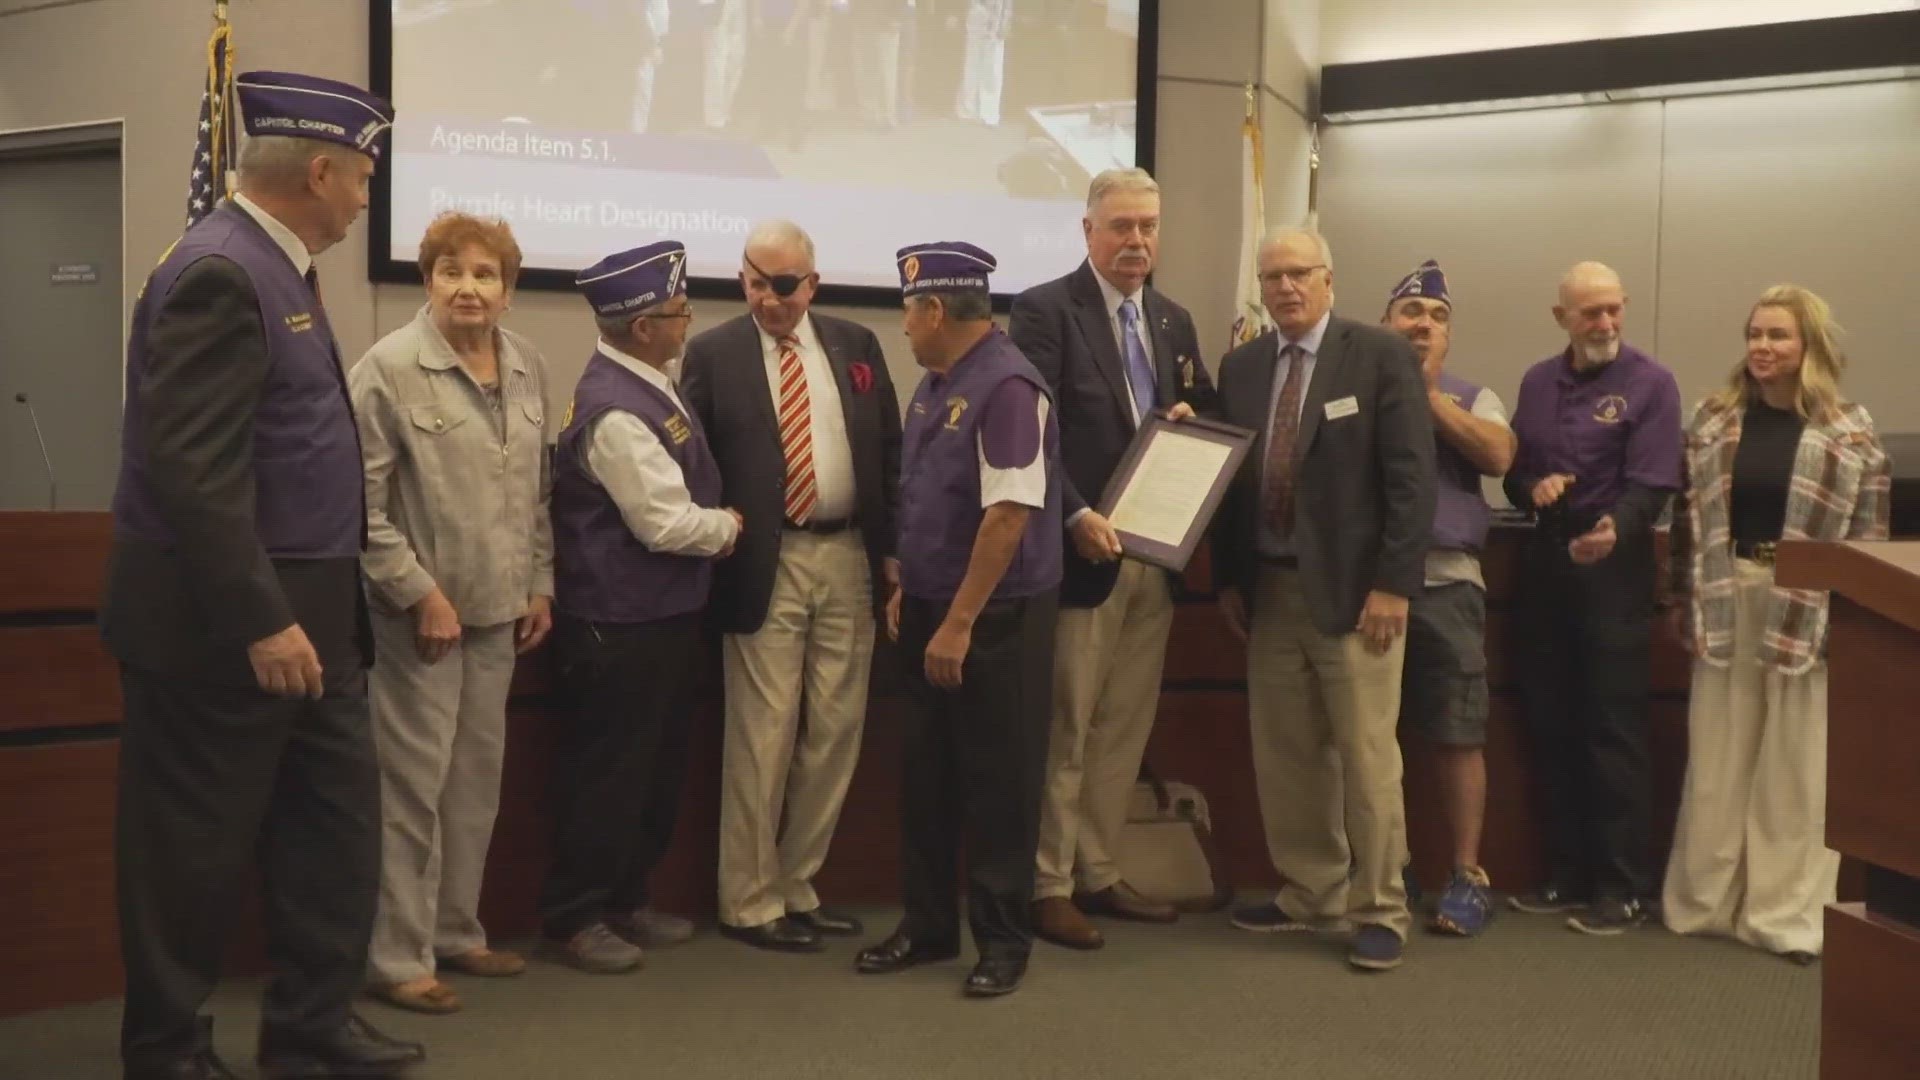 In a ceremony honoring combat wounded veterans and their families, the city of Roseville gained the status of “Purple Heart City."